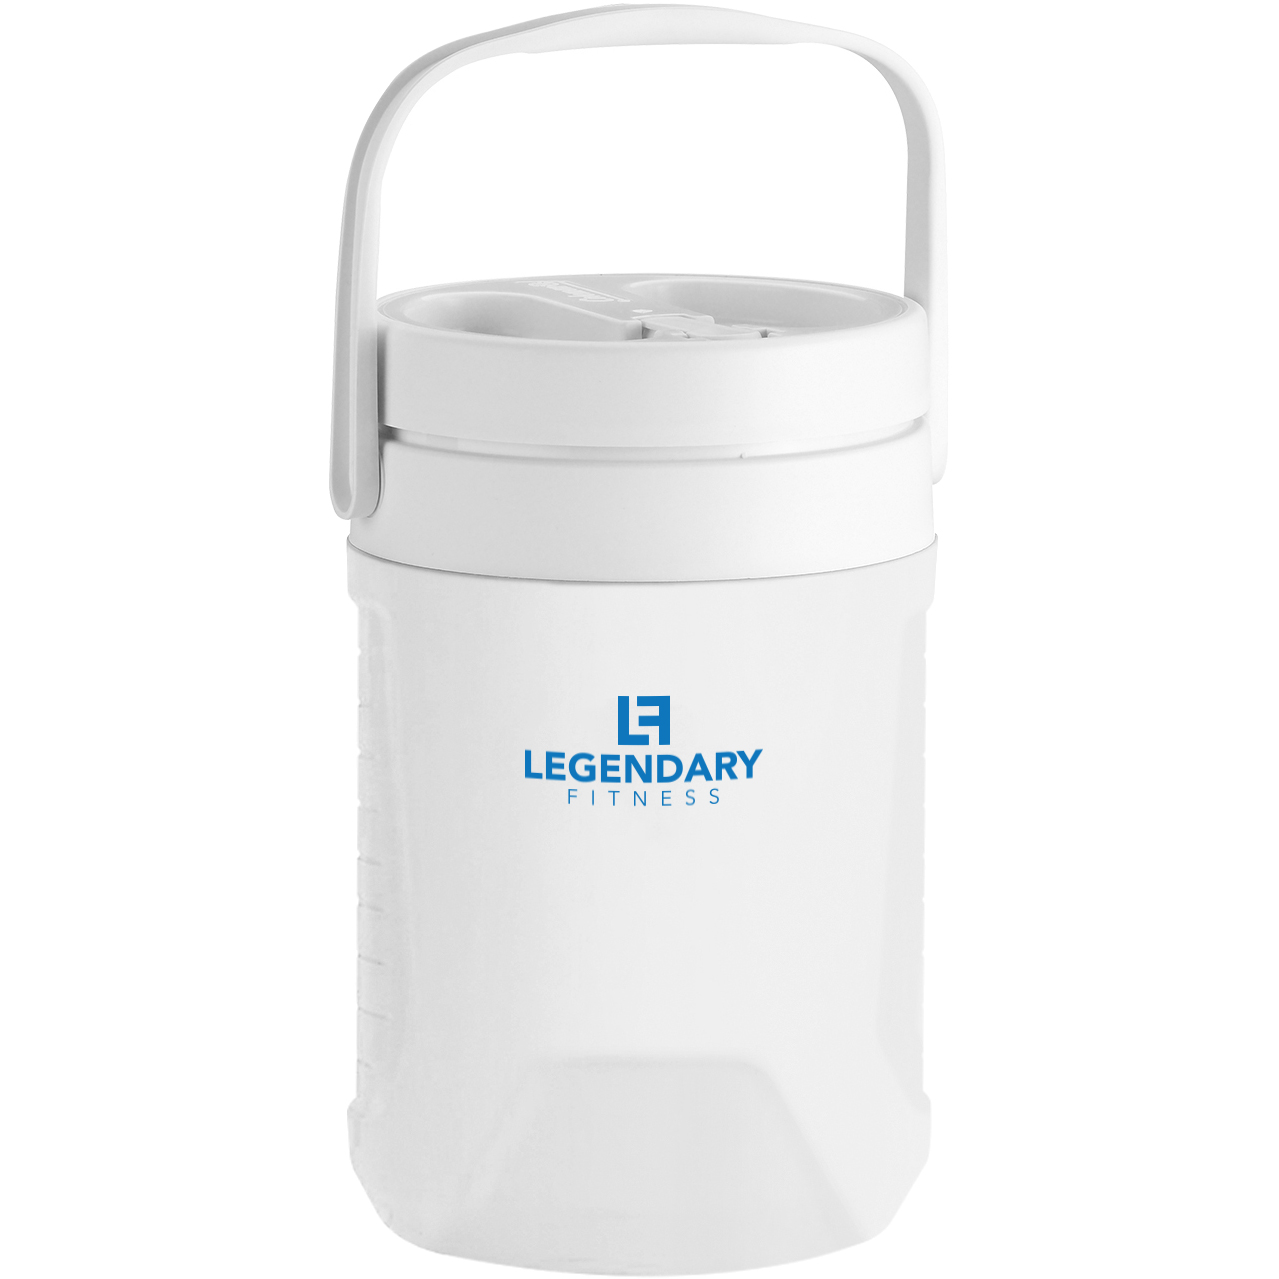 Retail Brands - Stanley - Thermos - HPG - Promotional Products